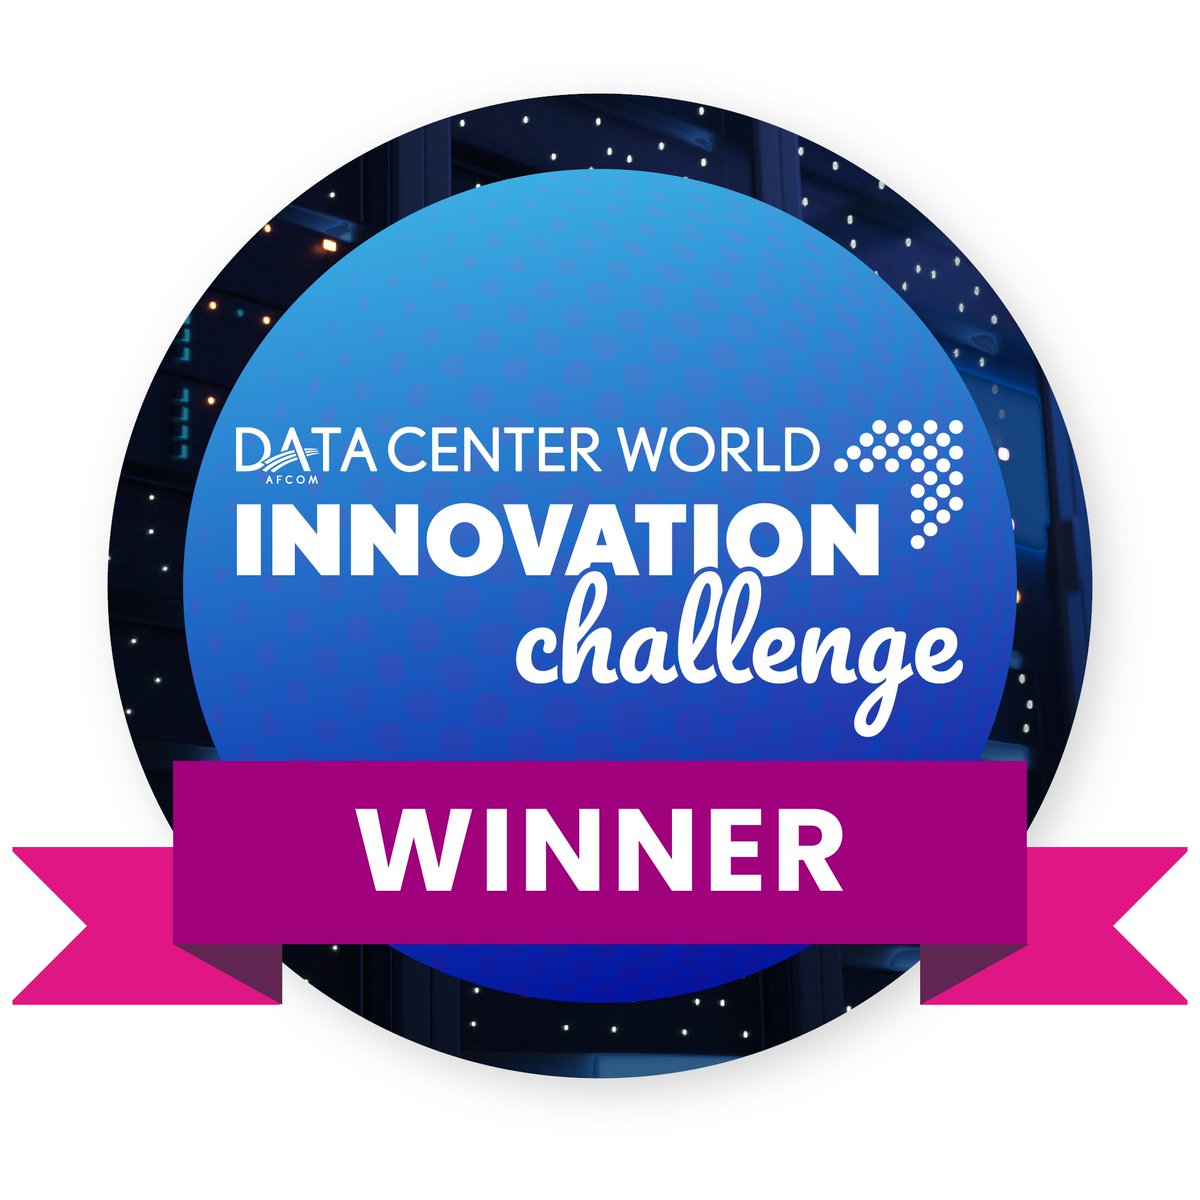 Ventana honored with Most Influential Founding Team Award at the Data Center Innovation Challenge during @DataCenterWorld.